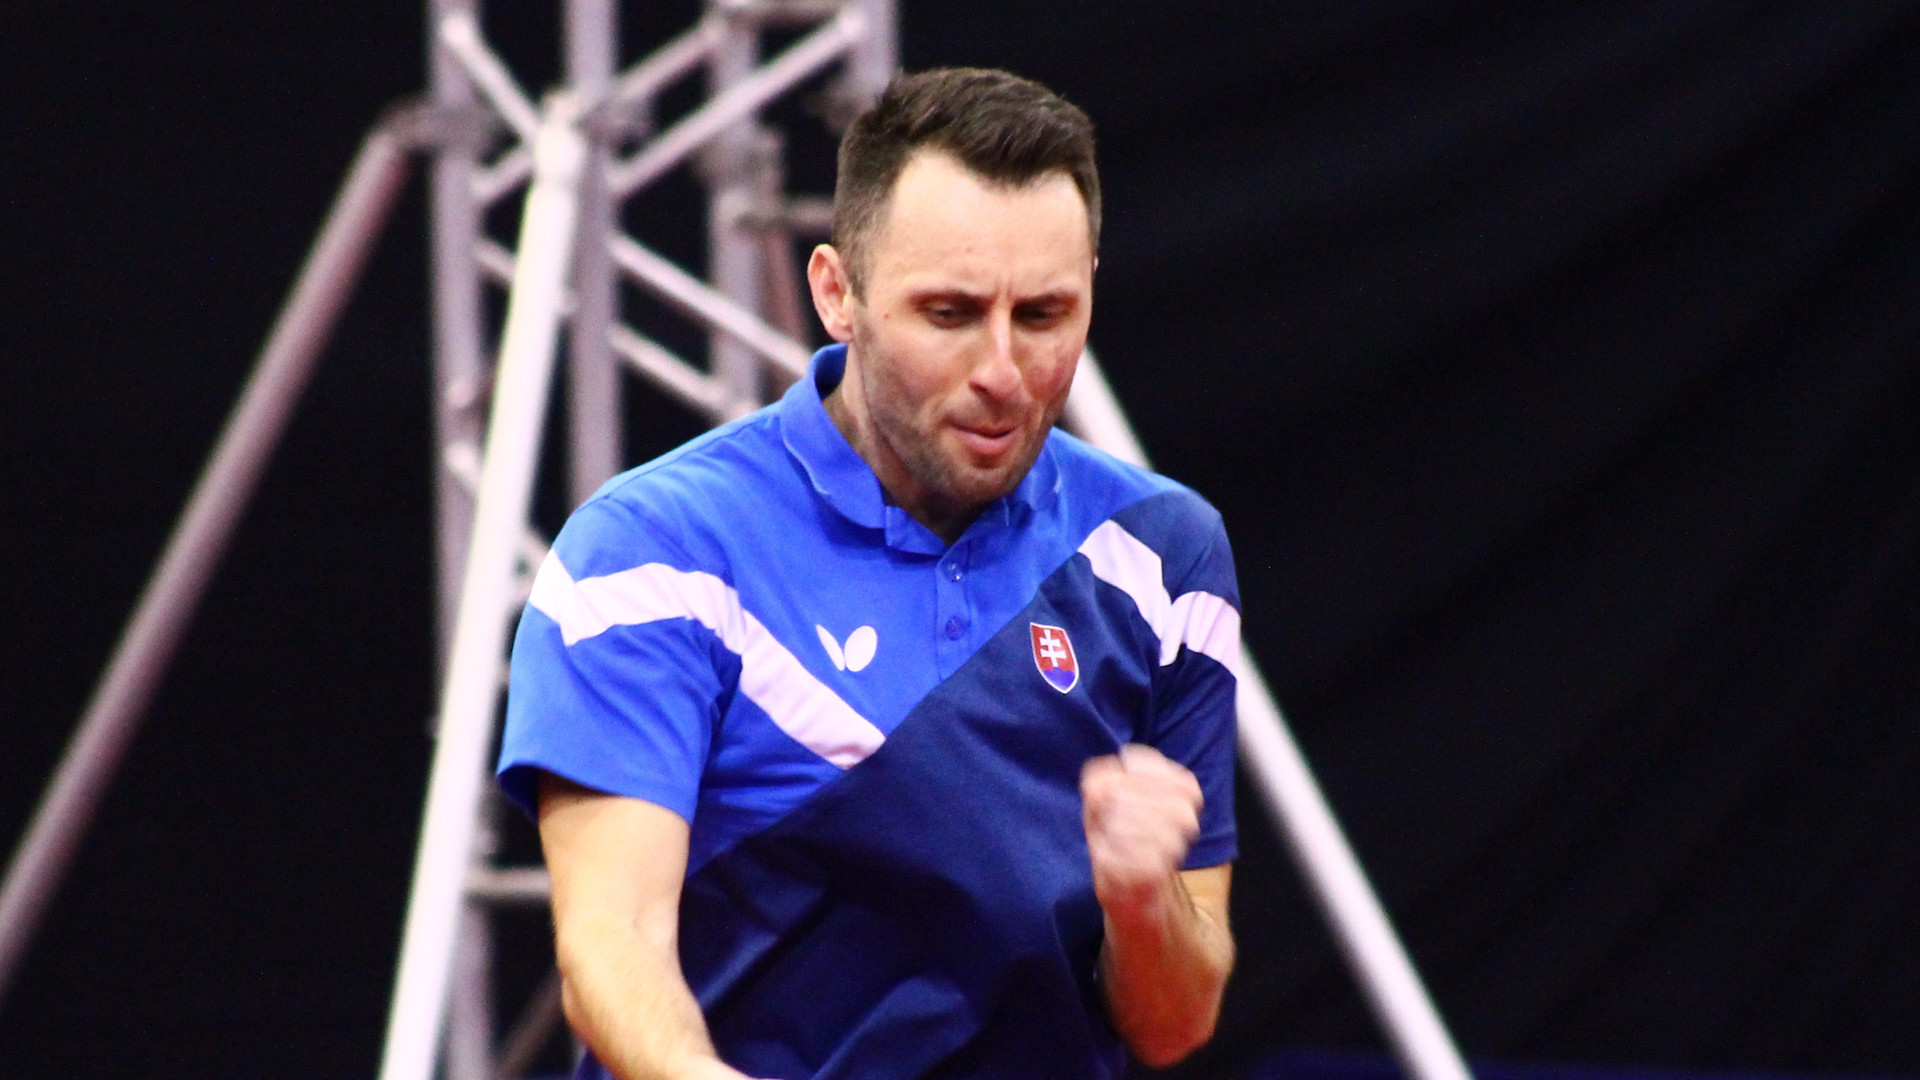 Slovenia's Ľubomír Pištej was among the players to progress through to the third preliminary round of the men's singles event on the opening day of the ITTF Czech Open in Olomouc ©ITTF